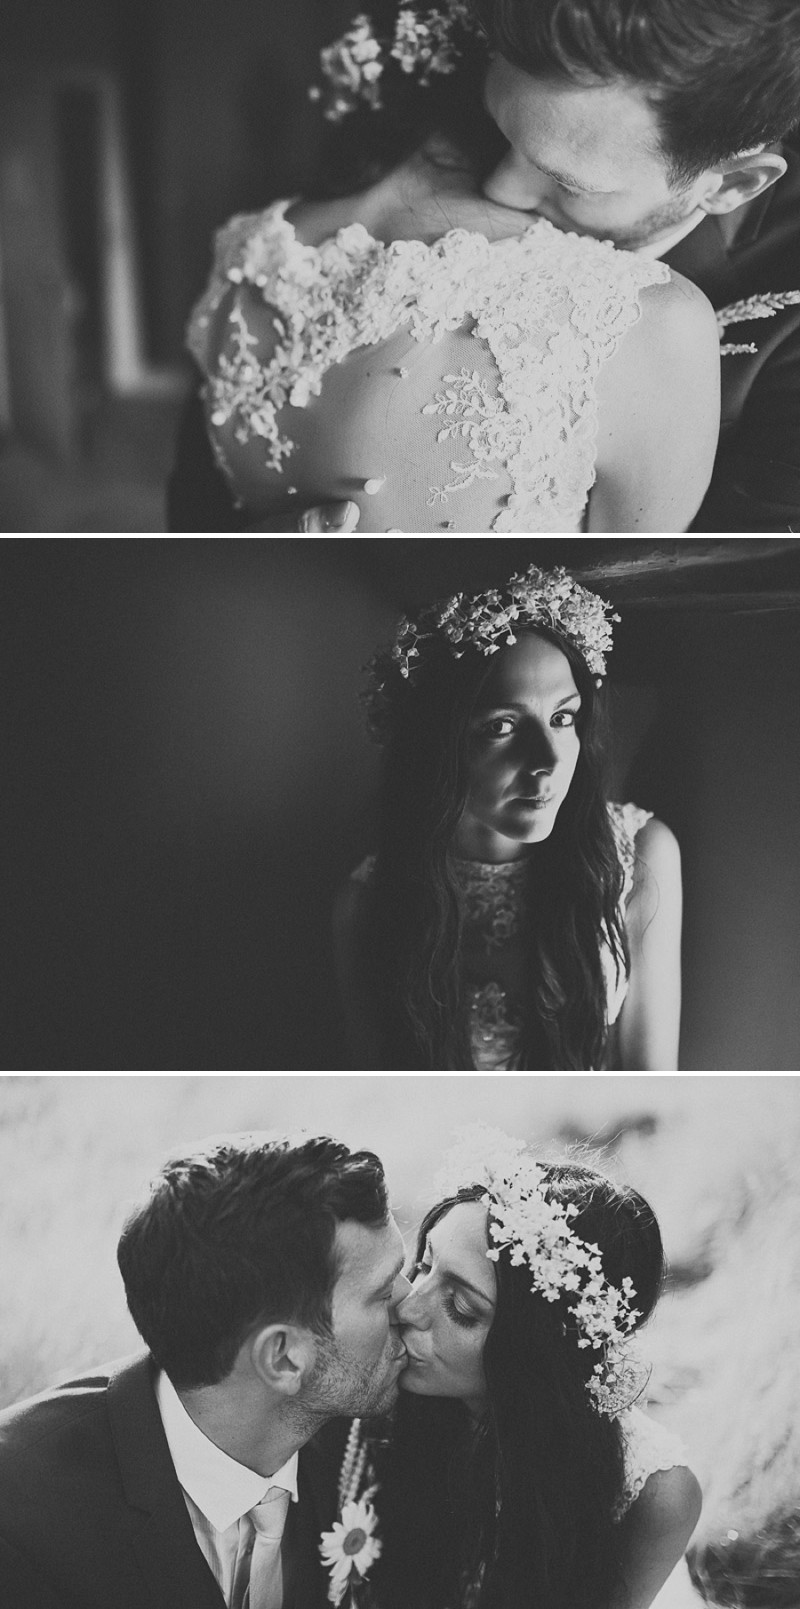 A Festival Inspired Bohemian Wedding With Wildflowers And A Floral ...